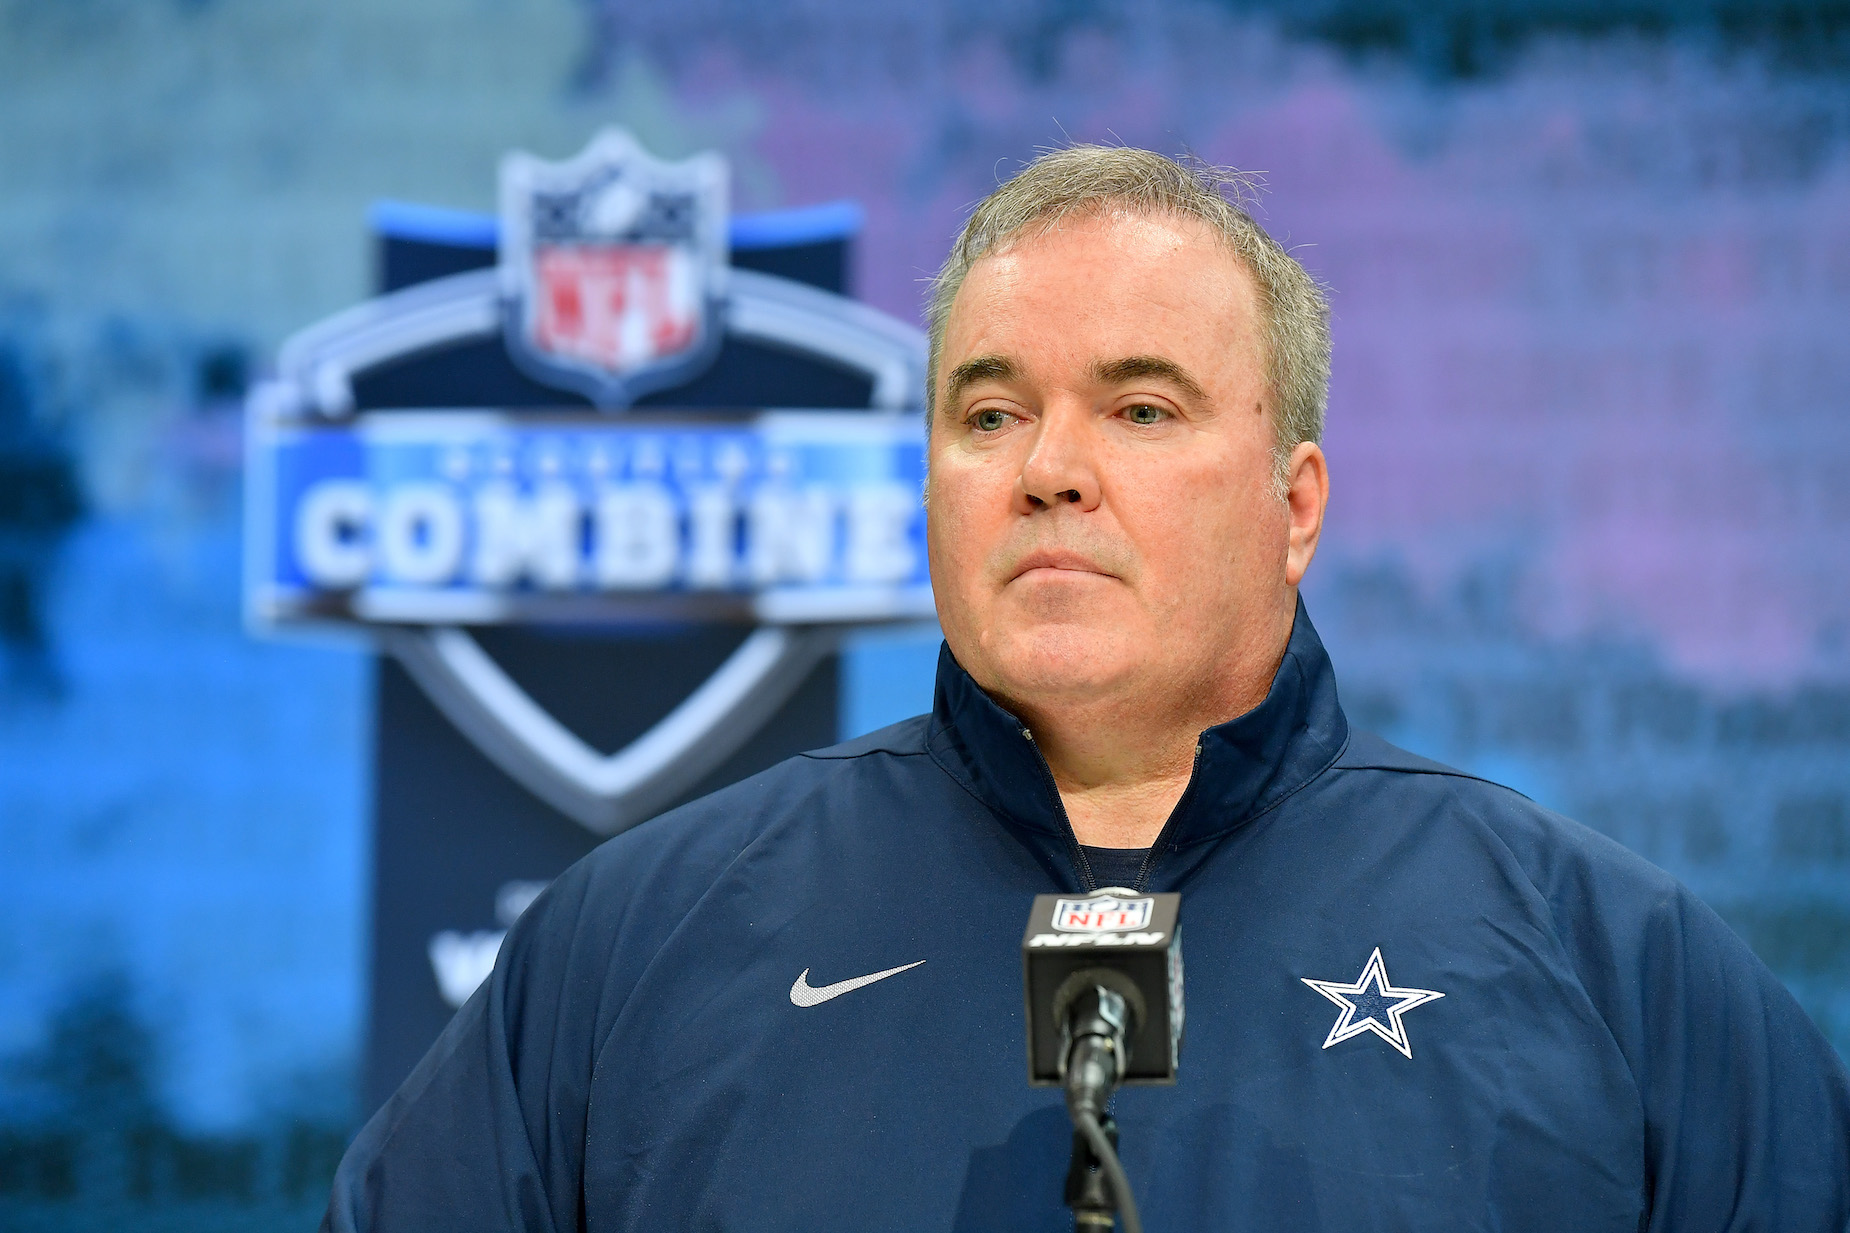 While the Dallas Cowboys aren't playing well, Mike McCarthy's media messaging may be even worse.